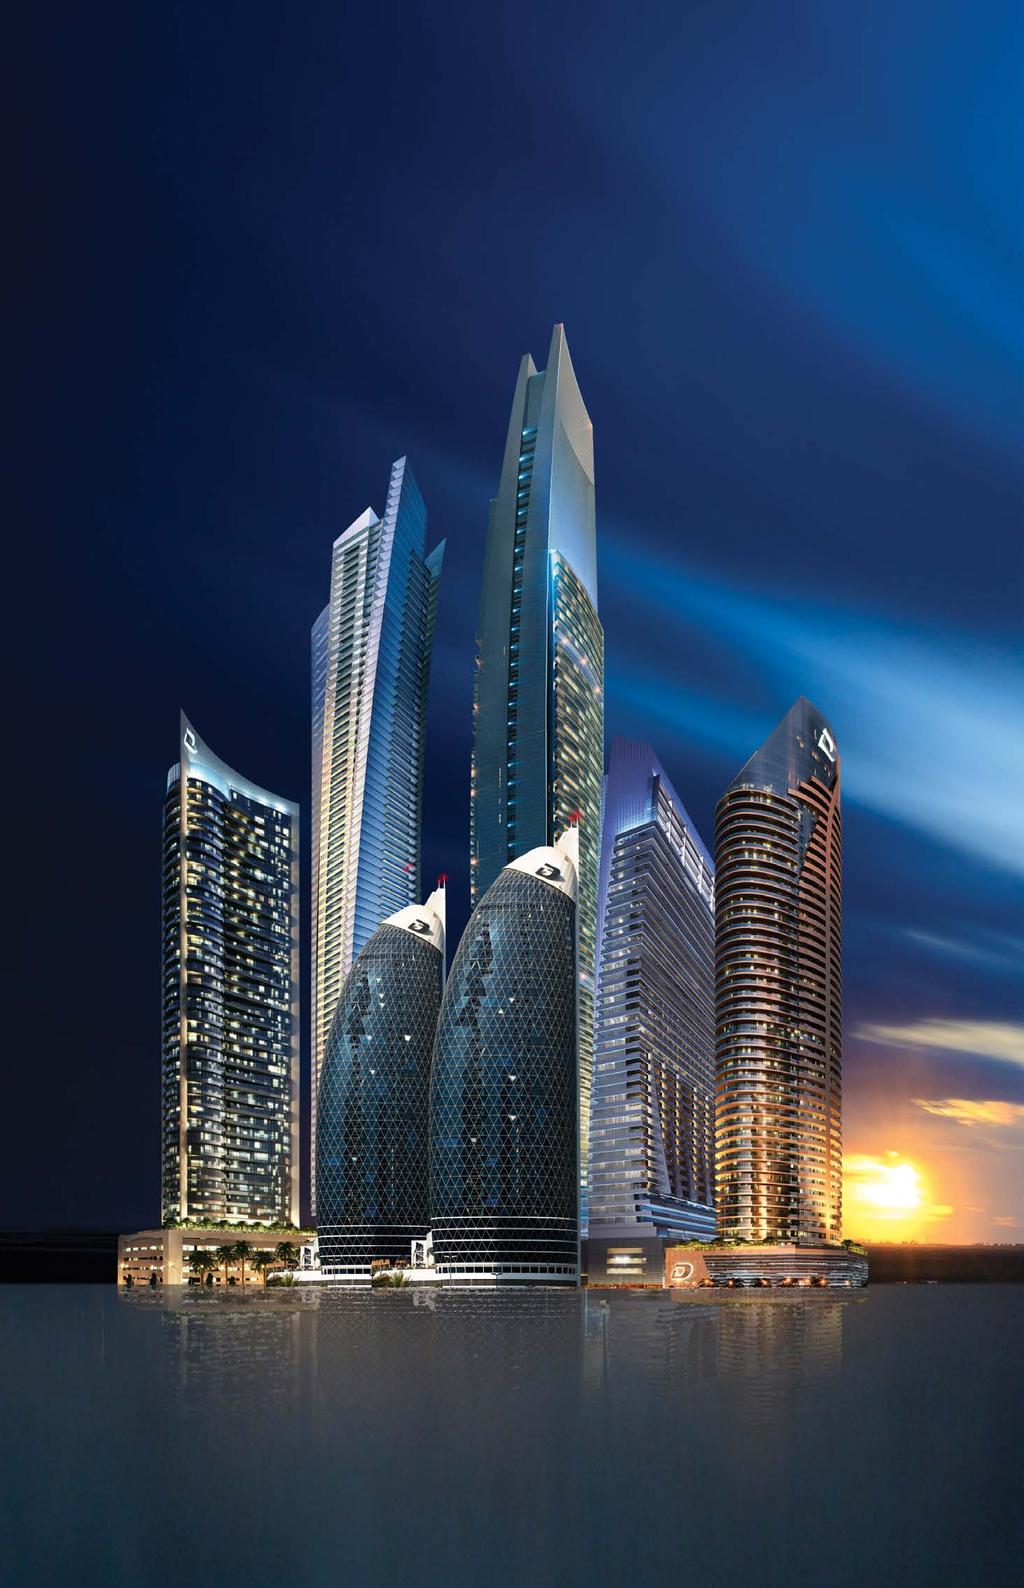 Since 2002, DAMAC Properties has quickly established itself as the region s leading real estate developer creating unique buildings, communities and luxury lifestyles in Dubai, Saudi Arabia, Iraq,